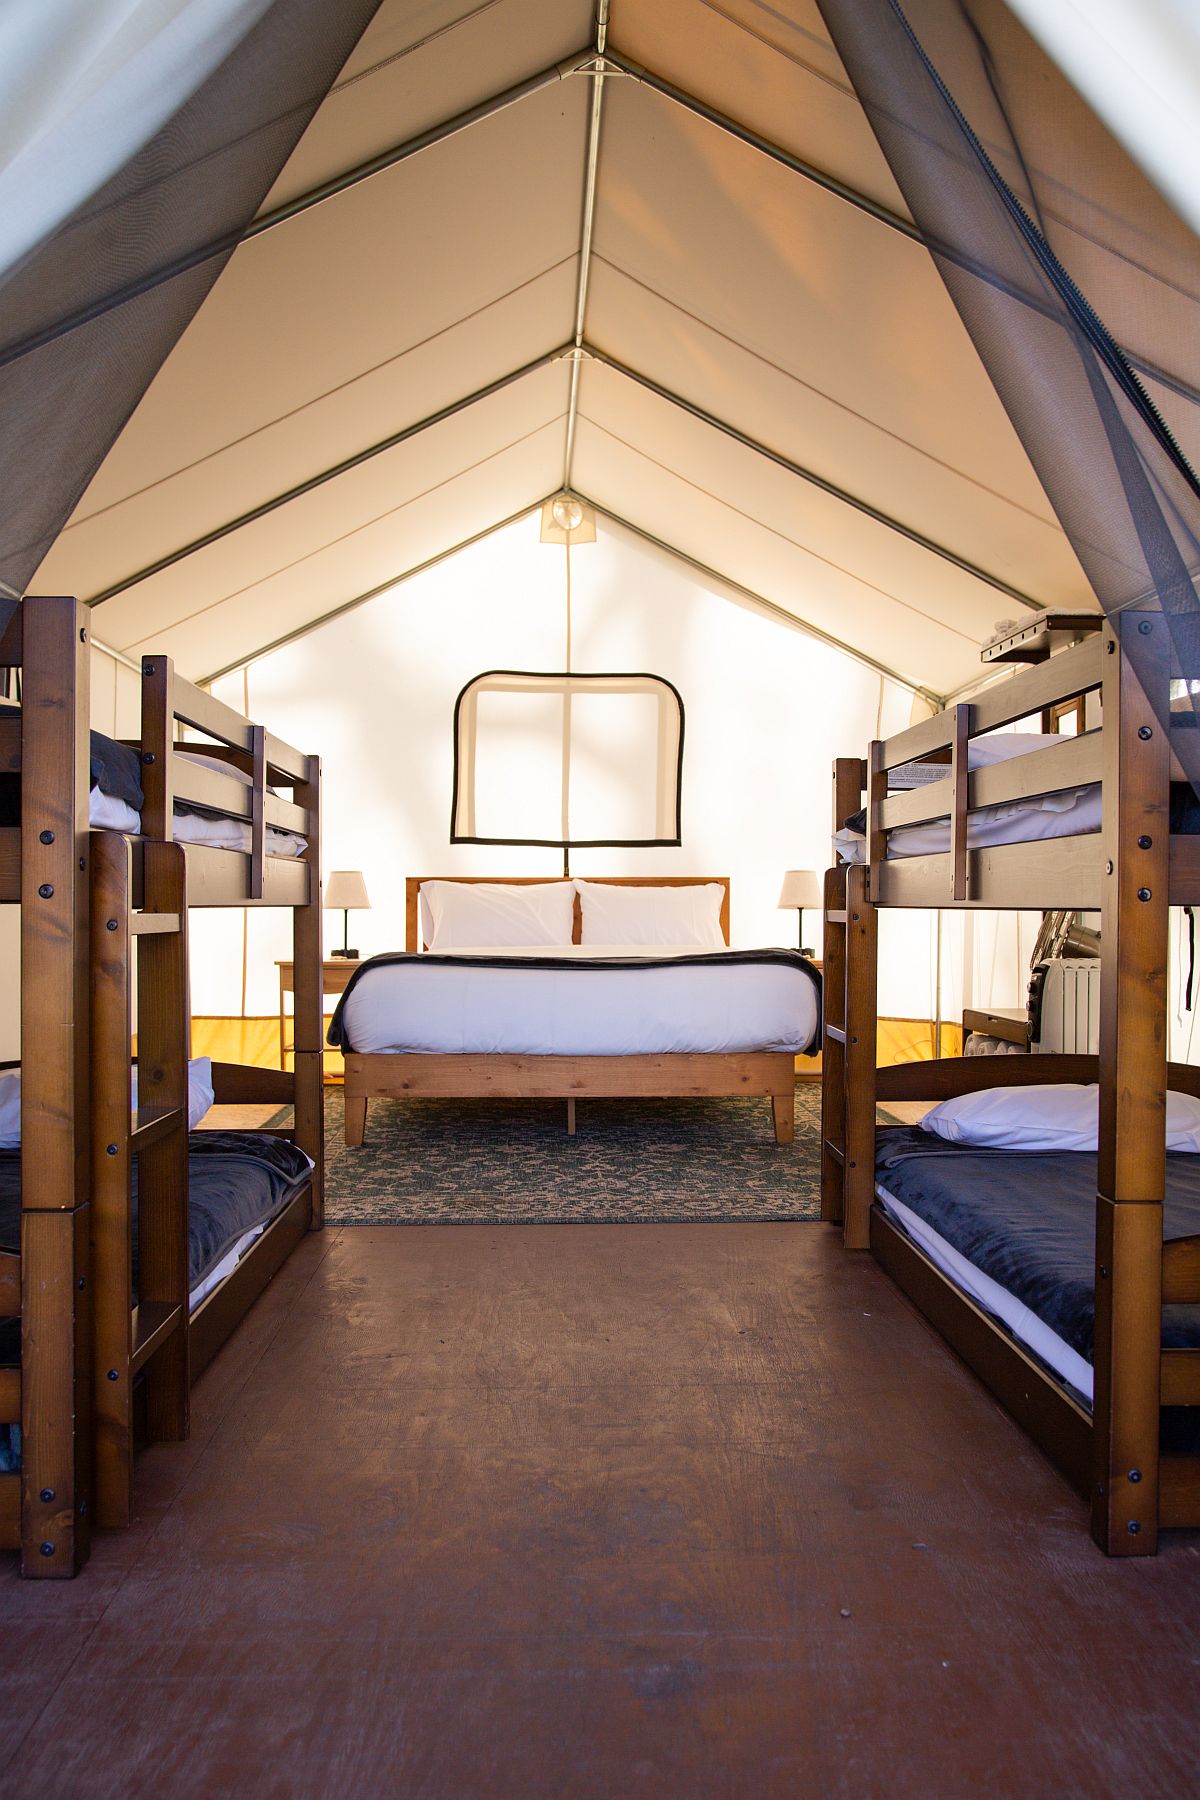 Bunk bed tents sleep two adults and up to four children. (Courtesy of Araceli Gonzalez)